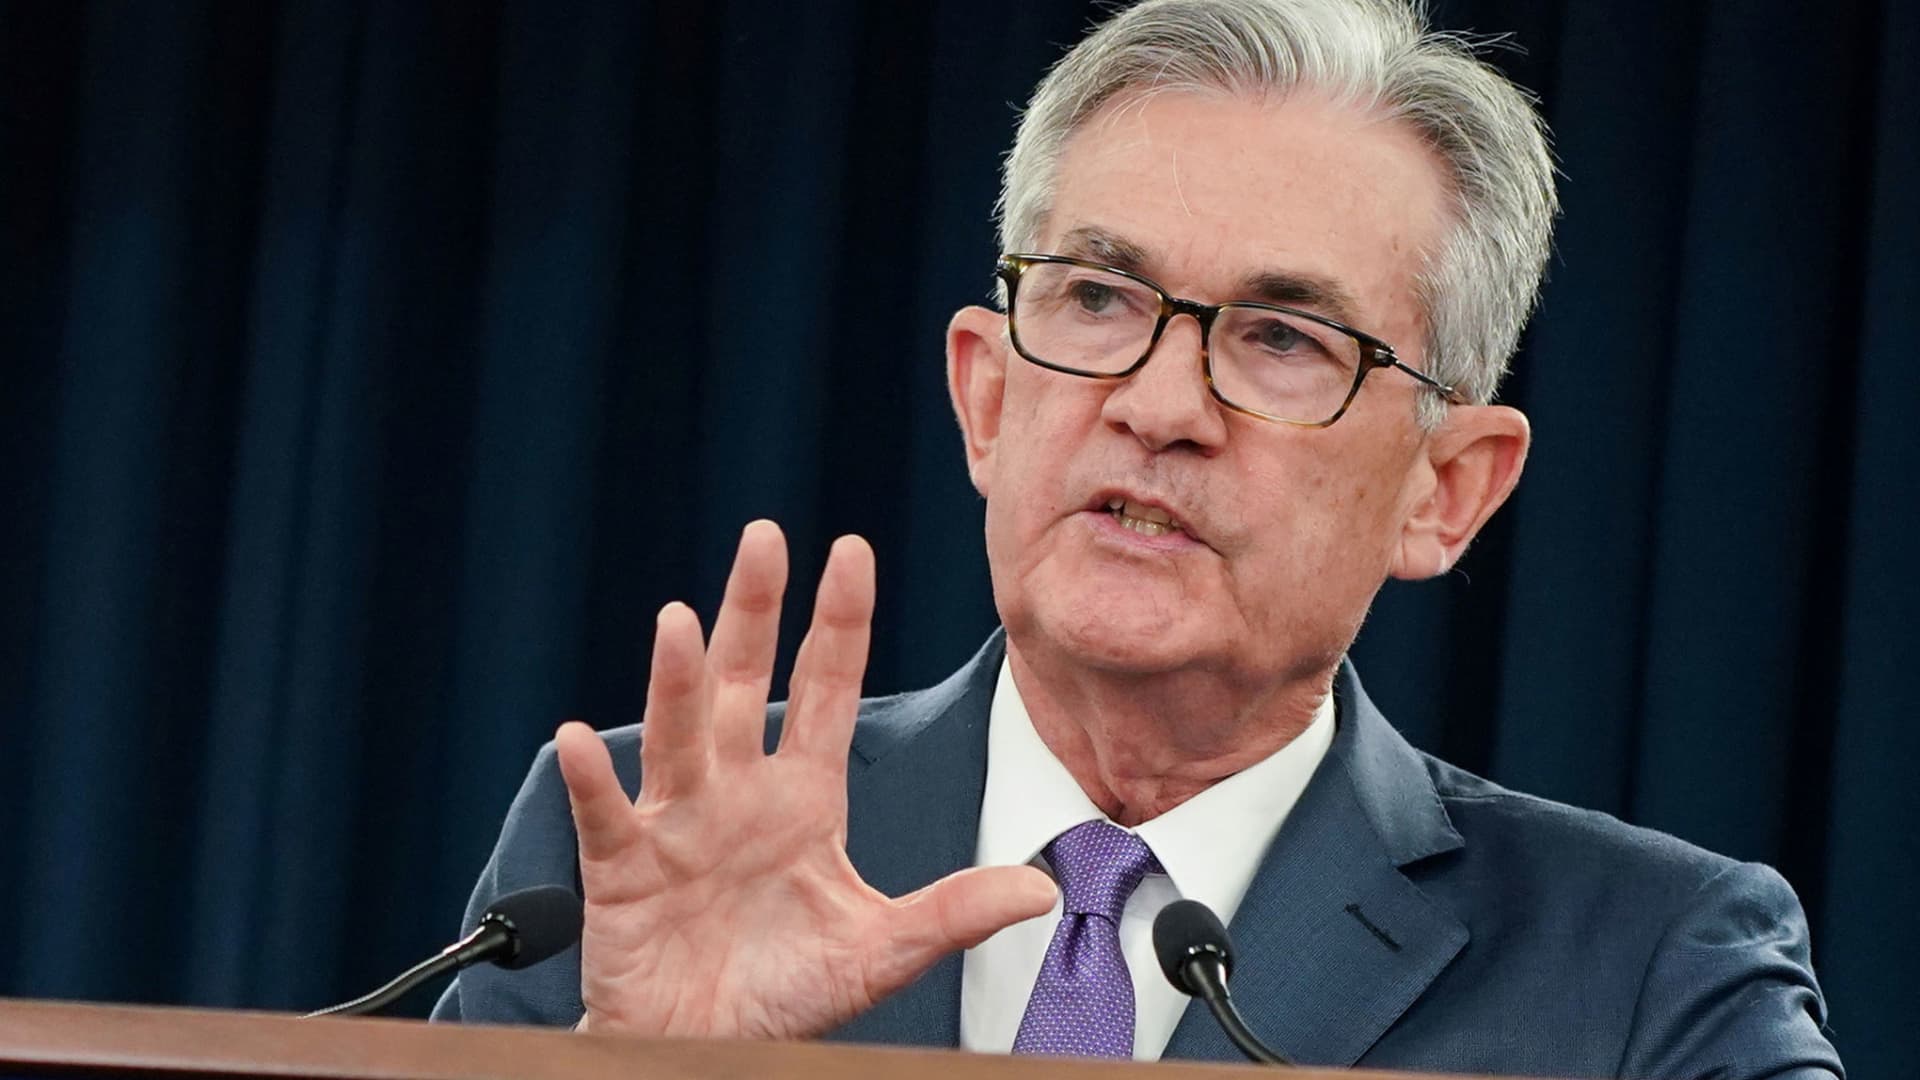 Powell confused markets on interest rates, but Fed probably cuts again